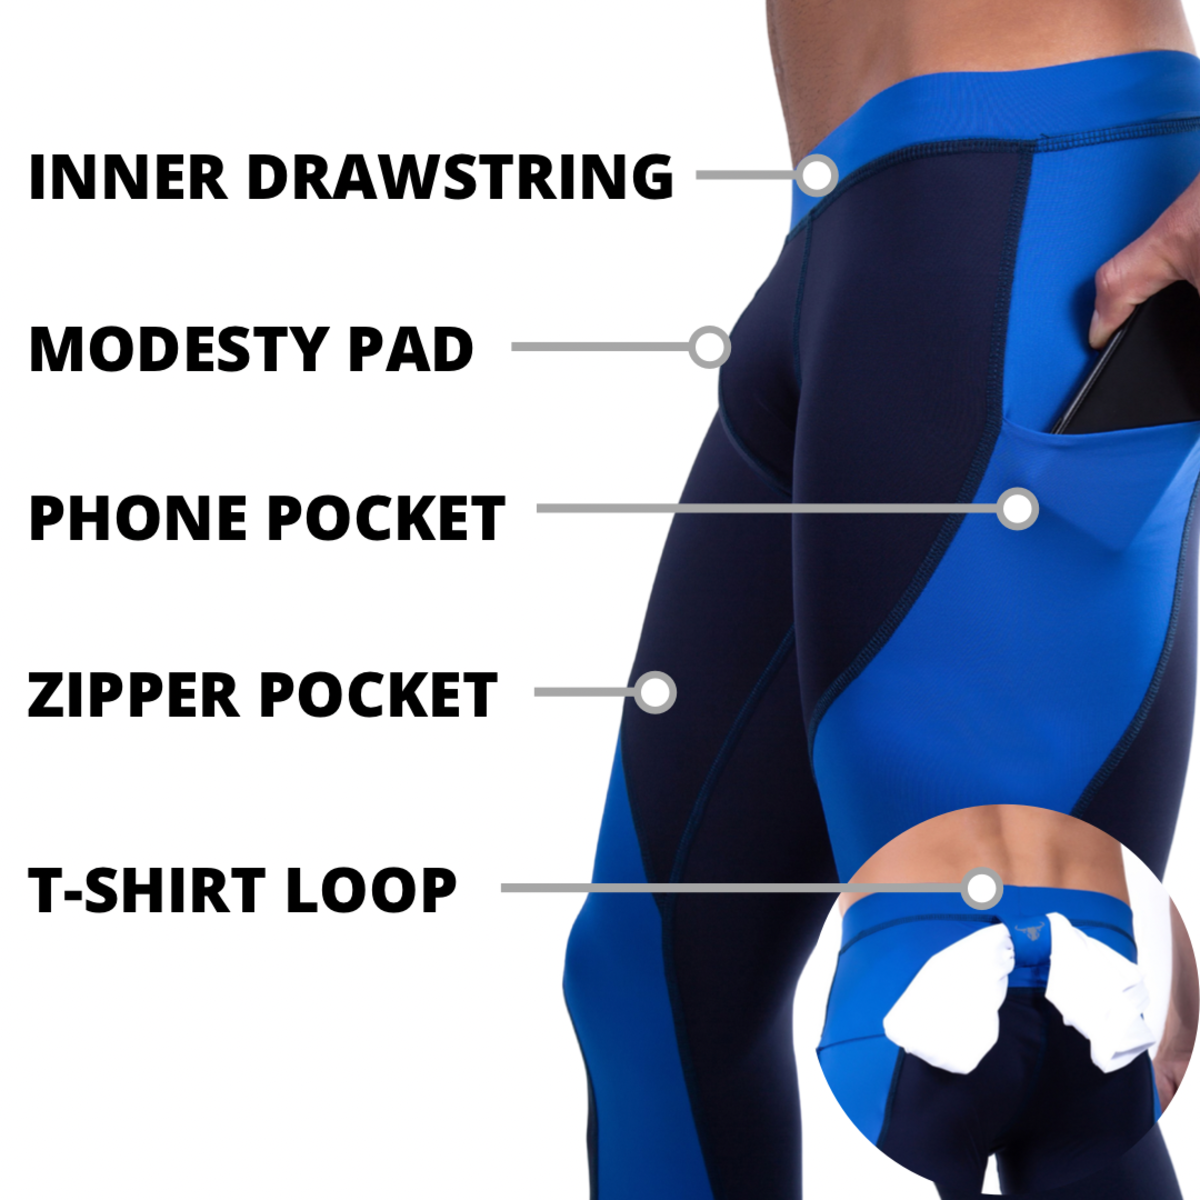 7 Reasons to Wear Compression Leggings When You Exercise, by Matador  Meggings, Matador Meggings